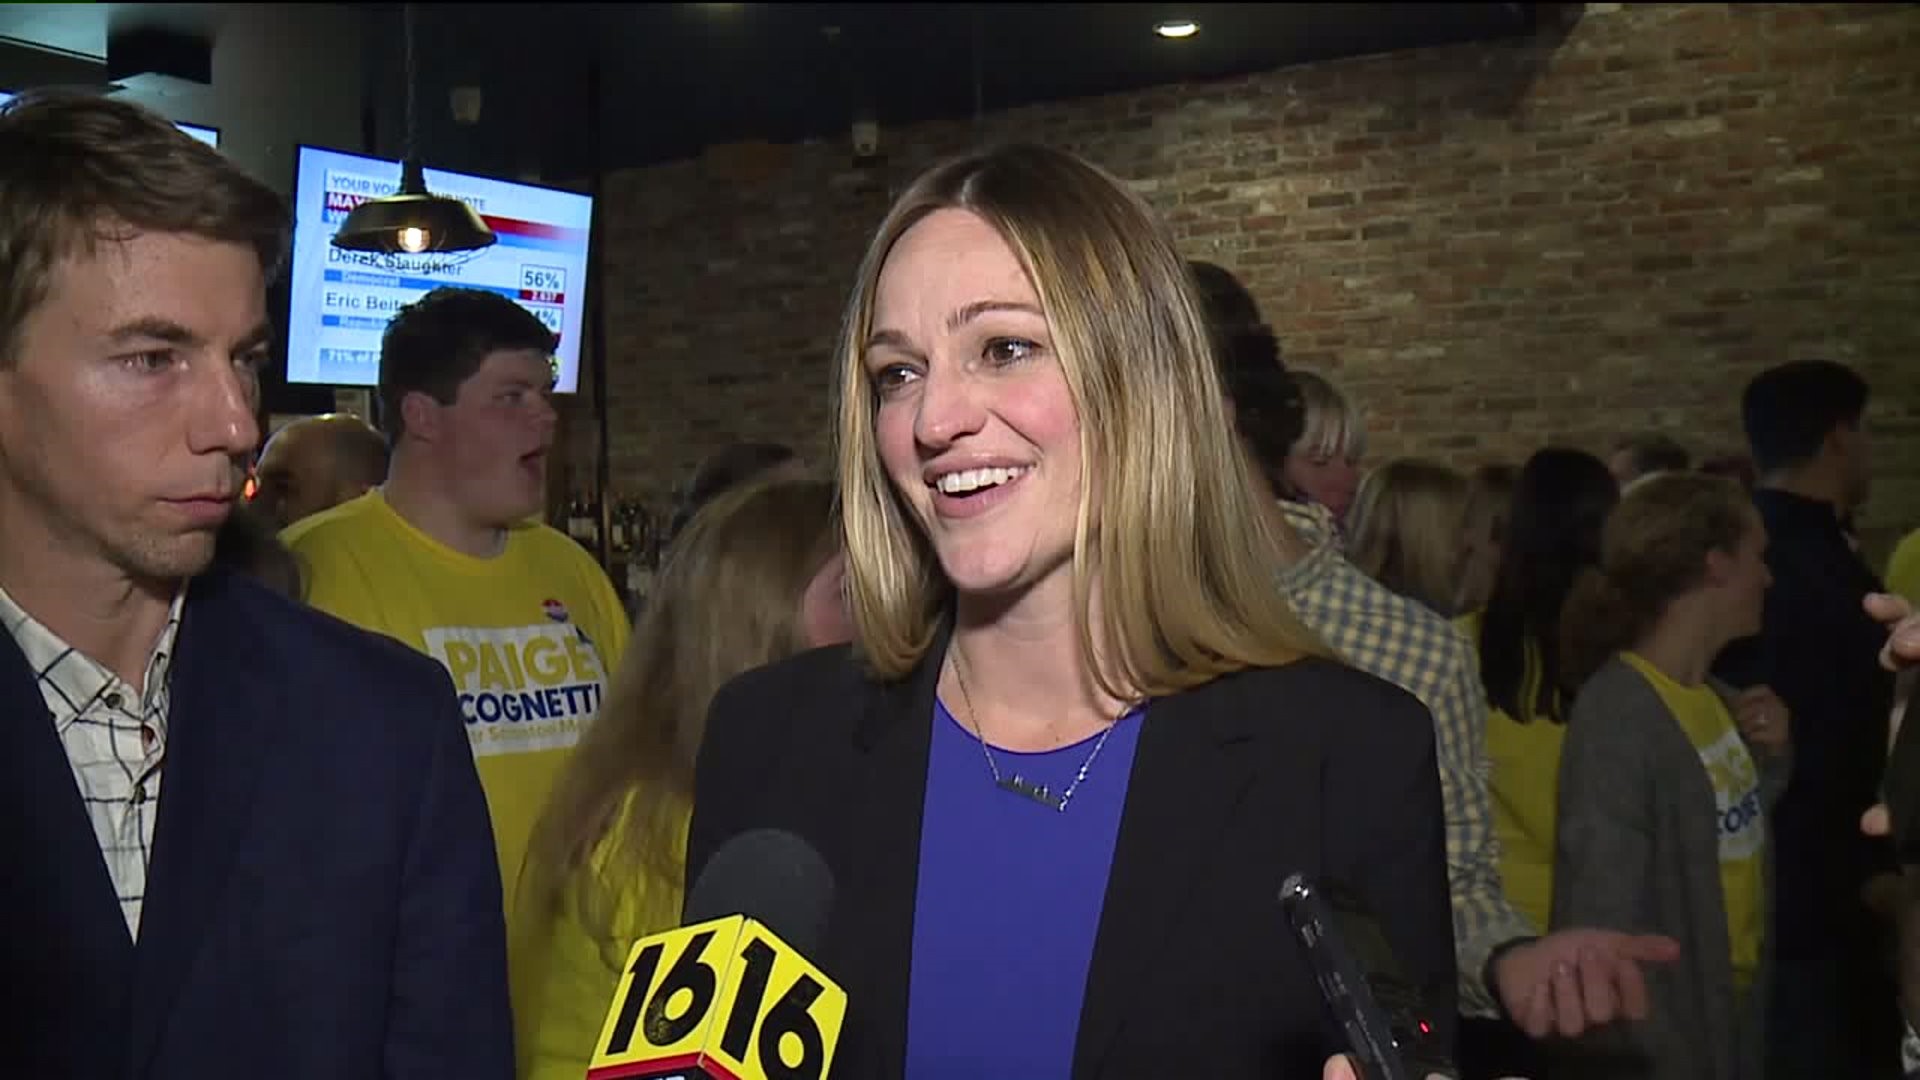 Paige Cognetti Named First Female Mayor of Scranton